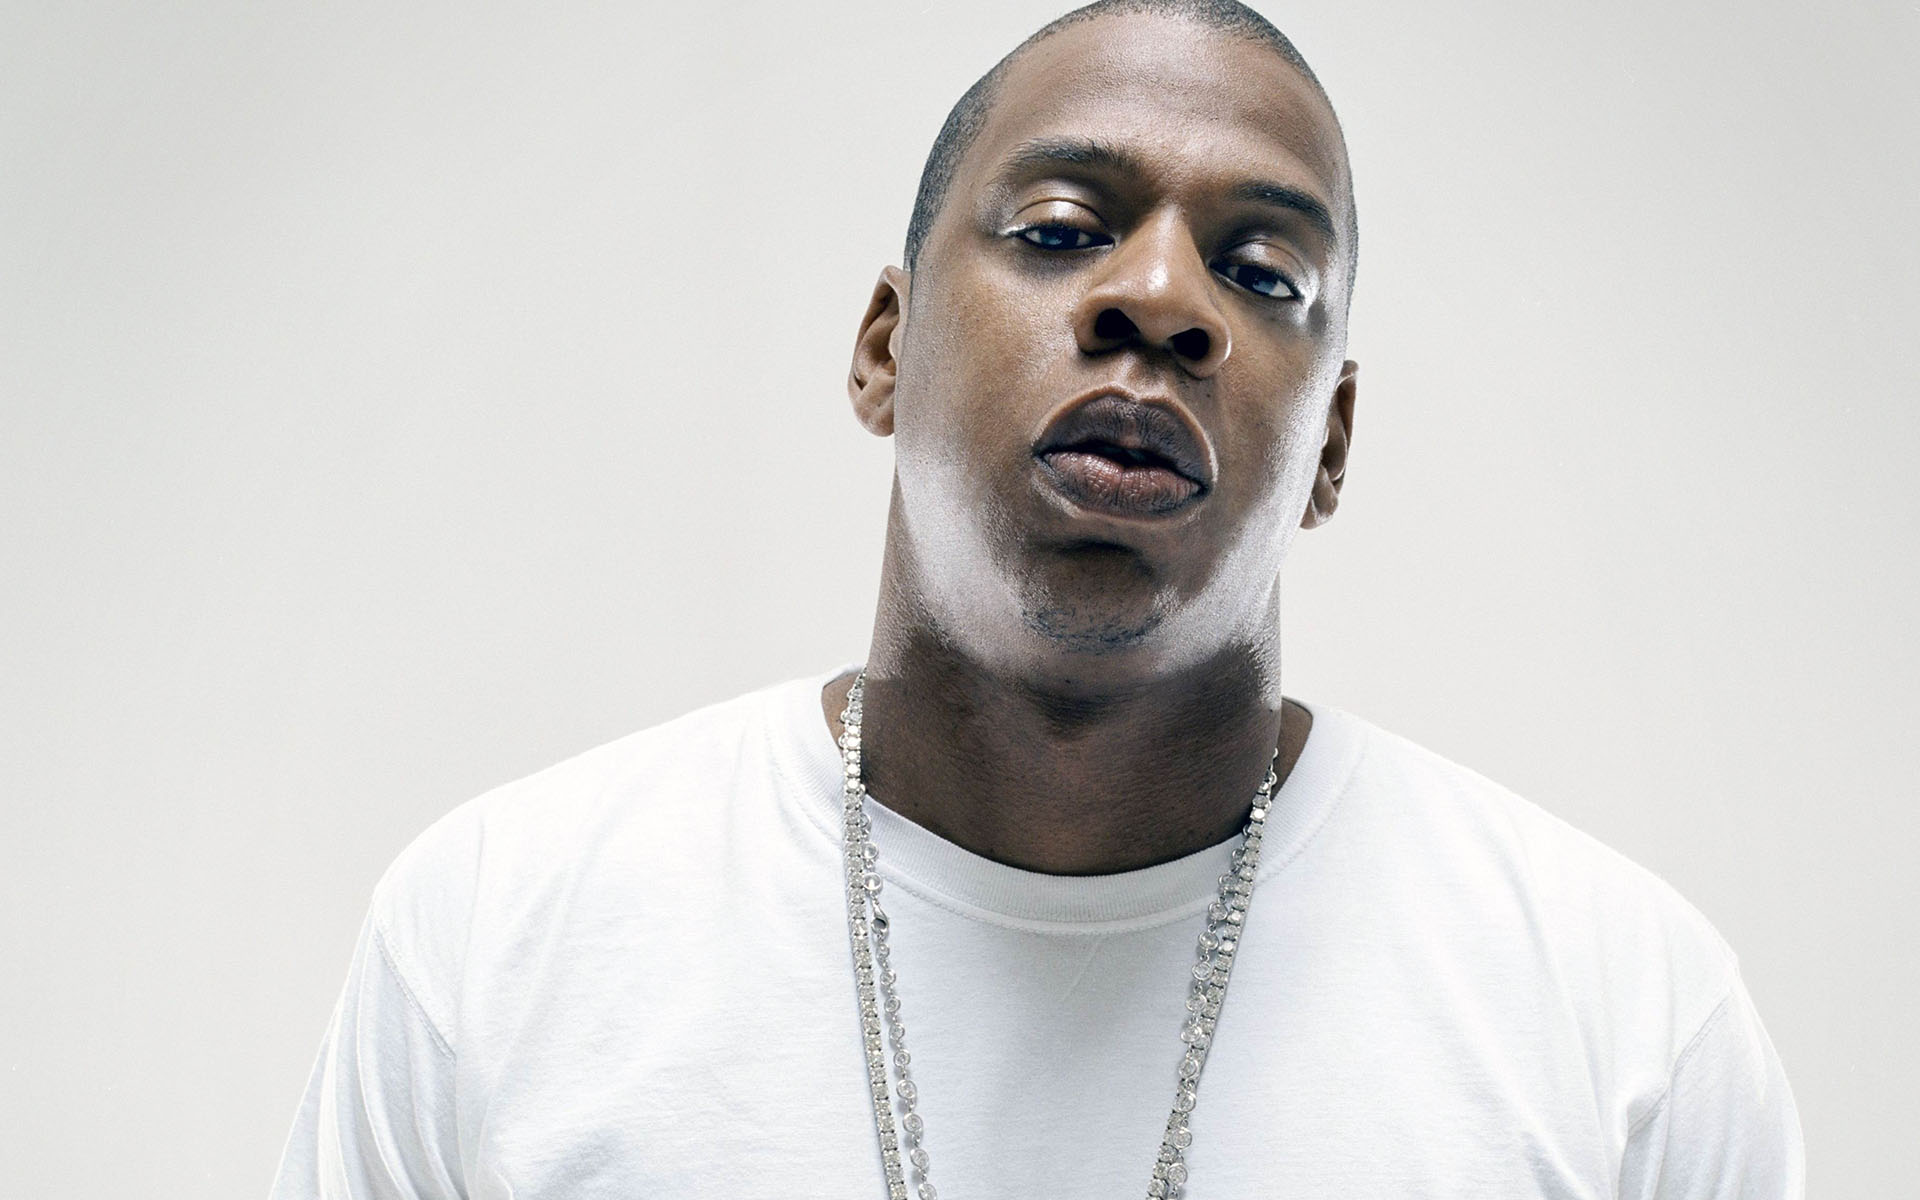 HD Jay Z Wallpaper And Photos Celebrities